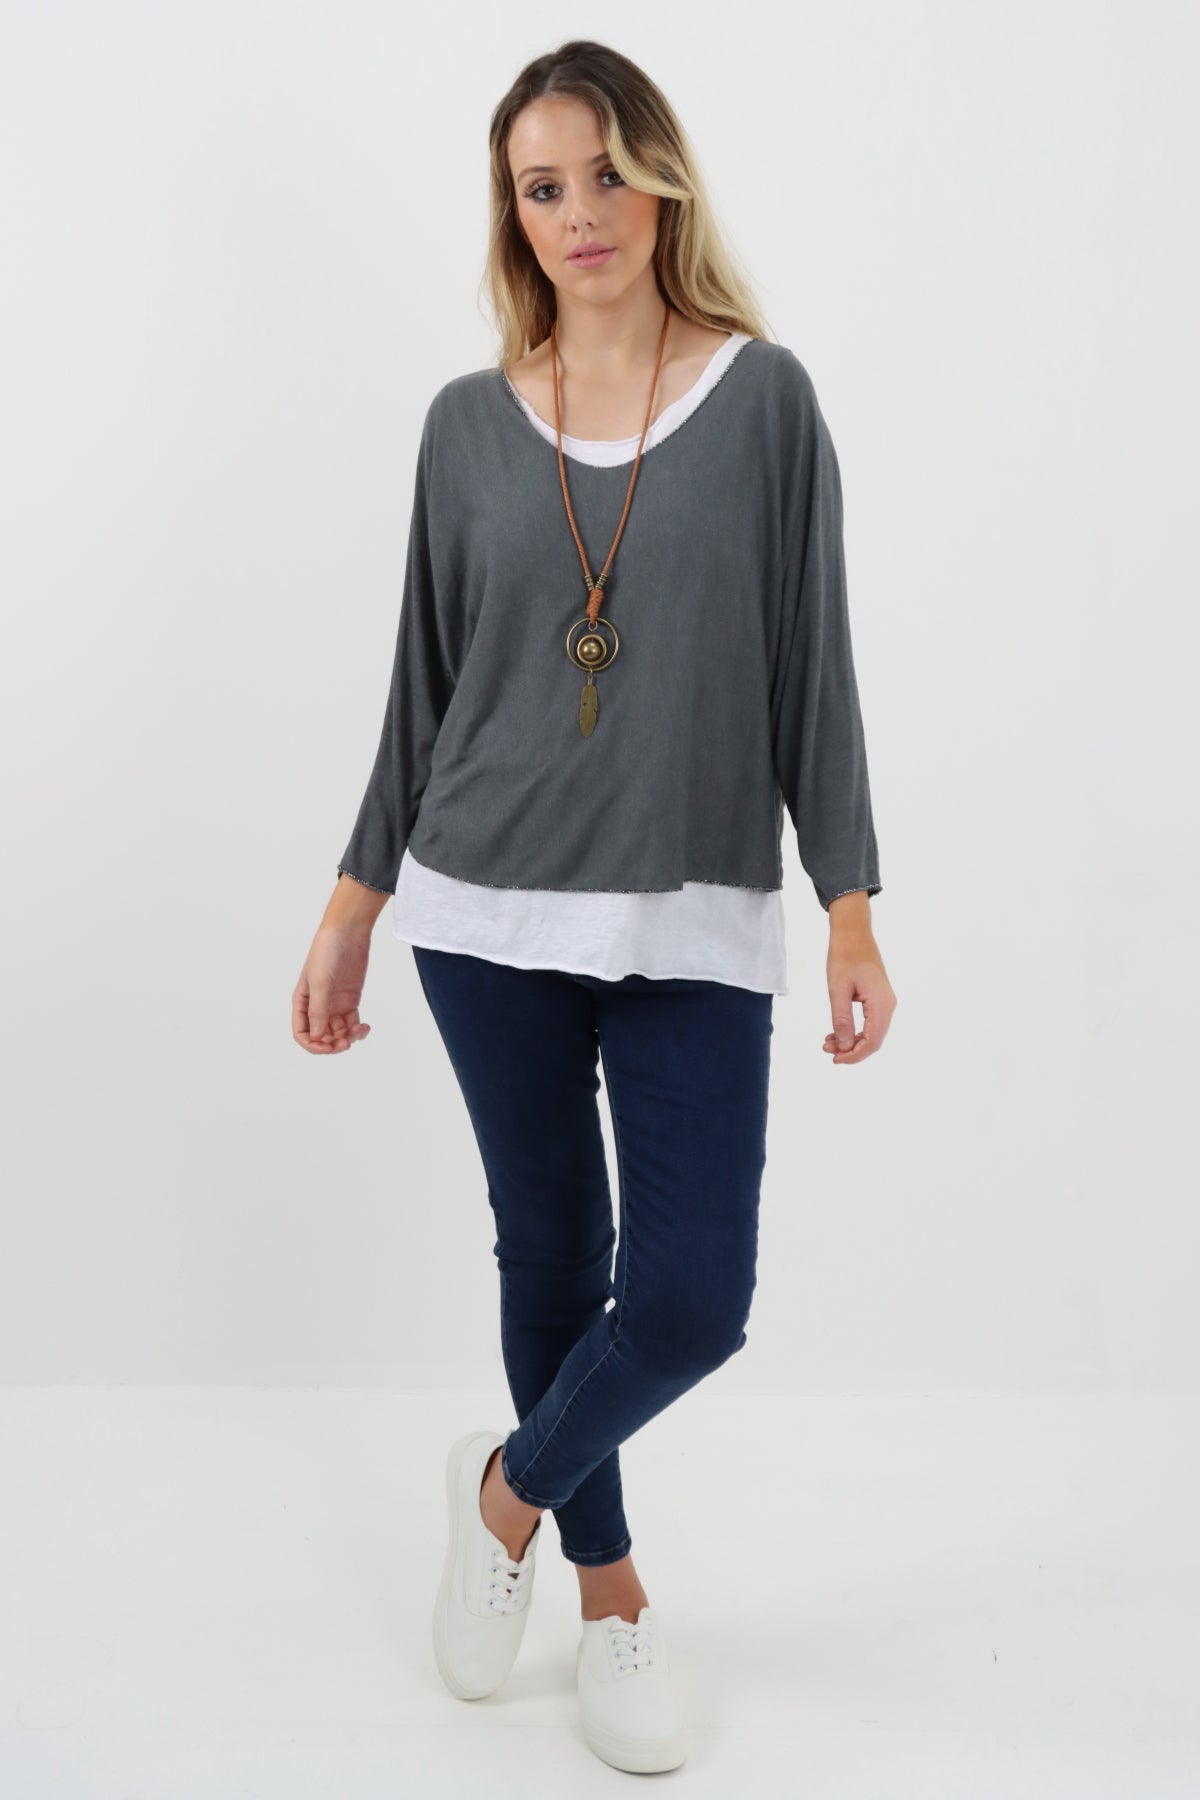 Made In Italy 2 in 1 Soft Knit Plain Necklace Jumper Top